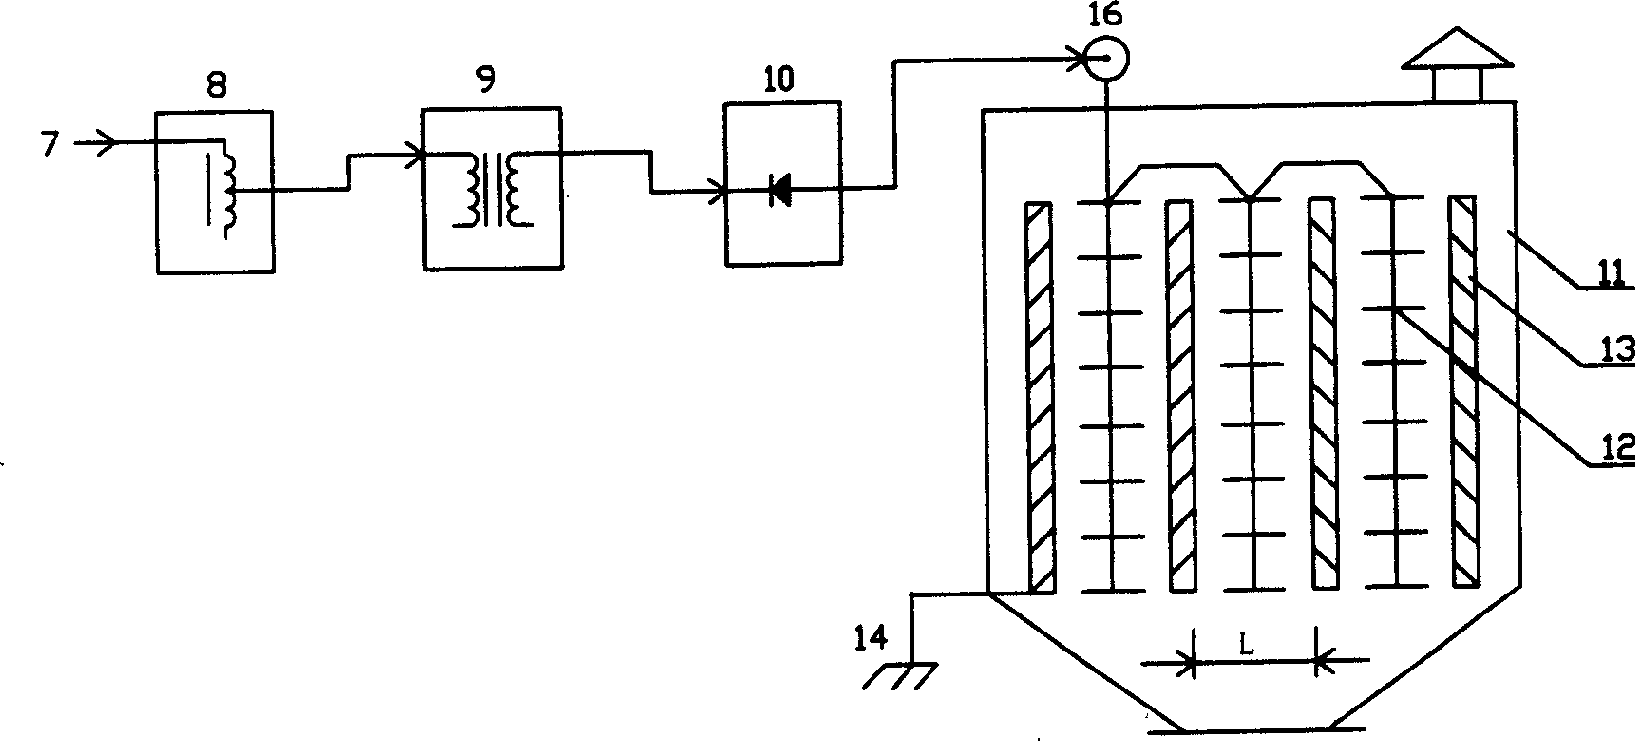 Direct current electrostatic dust collection method and dust collector